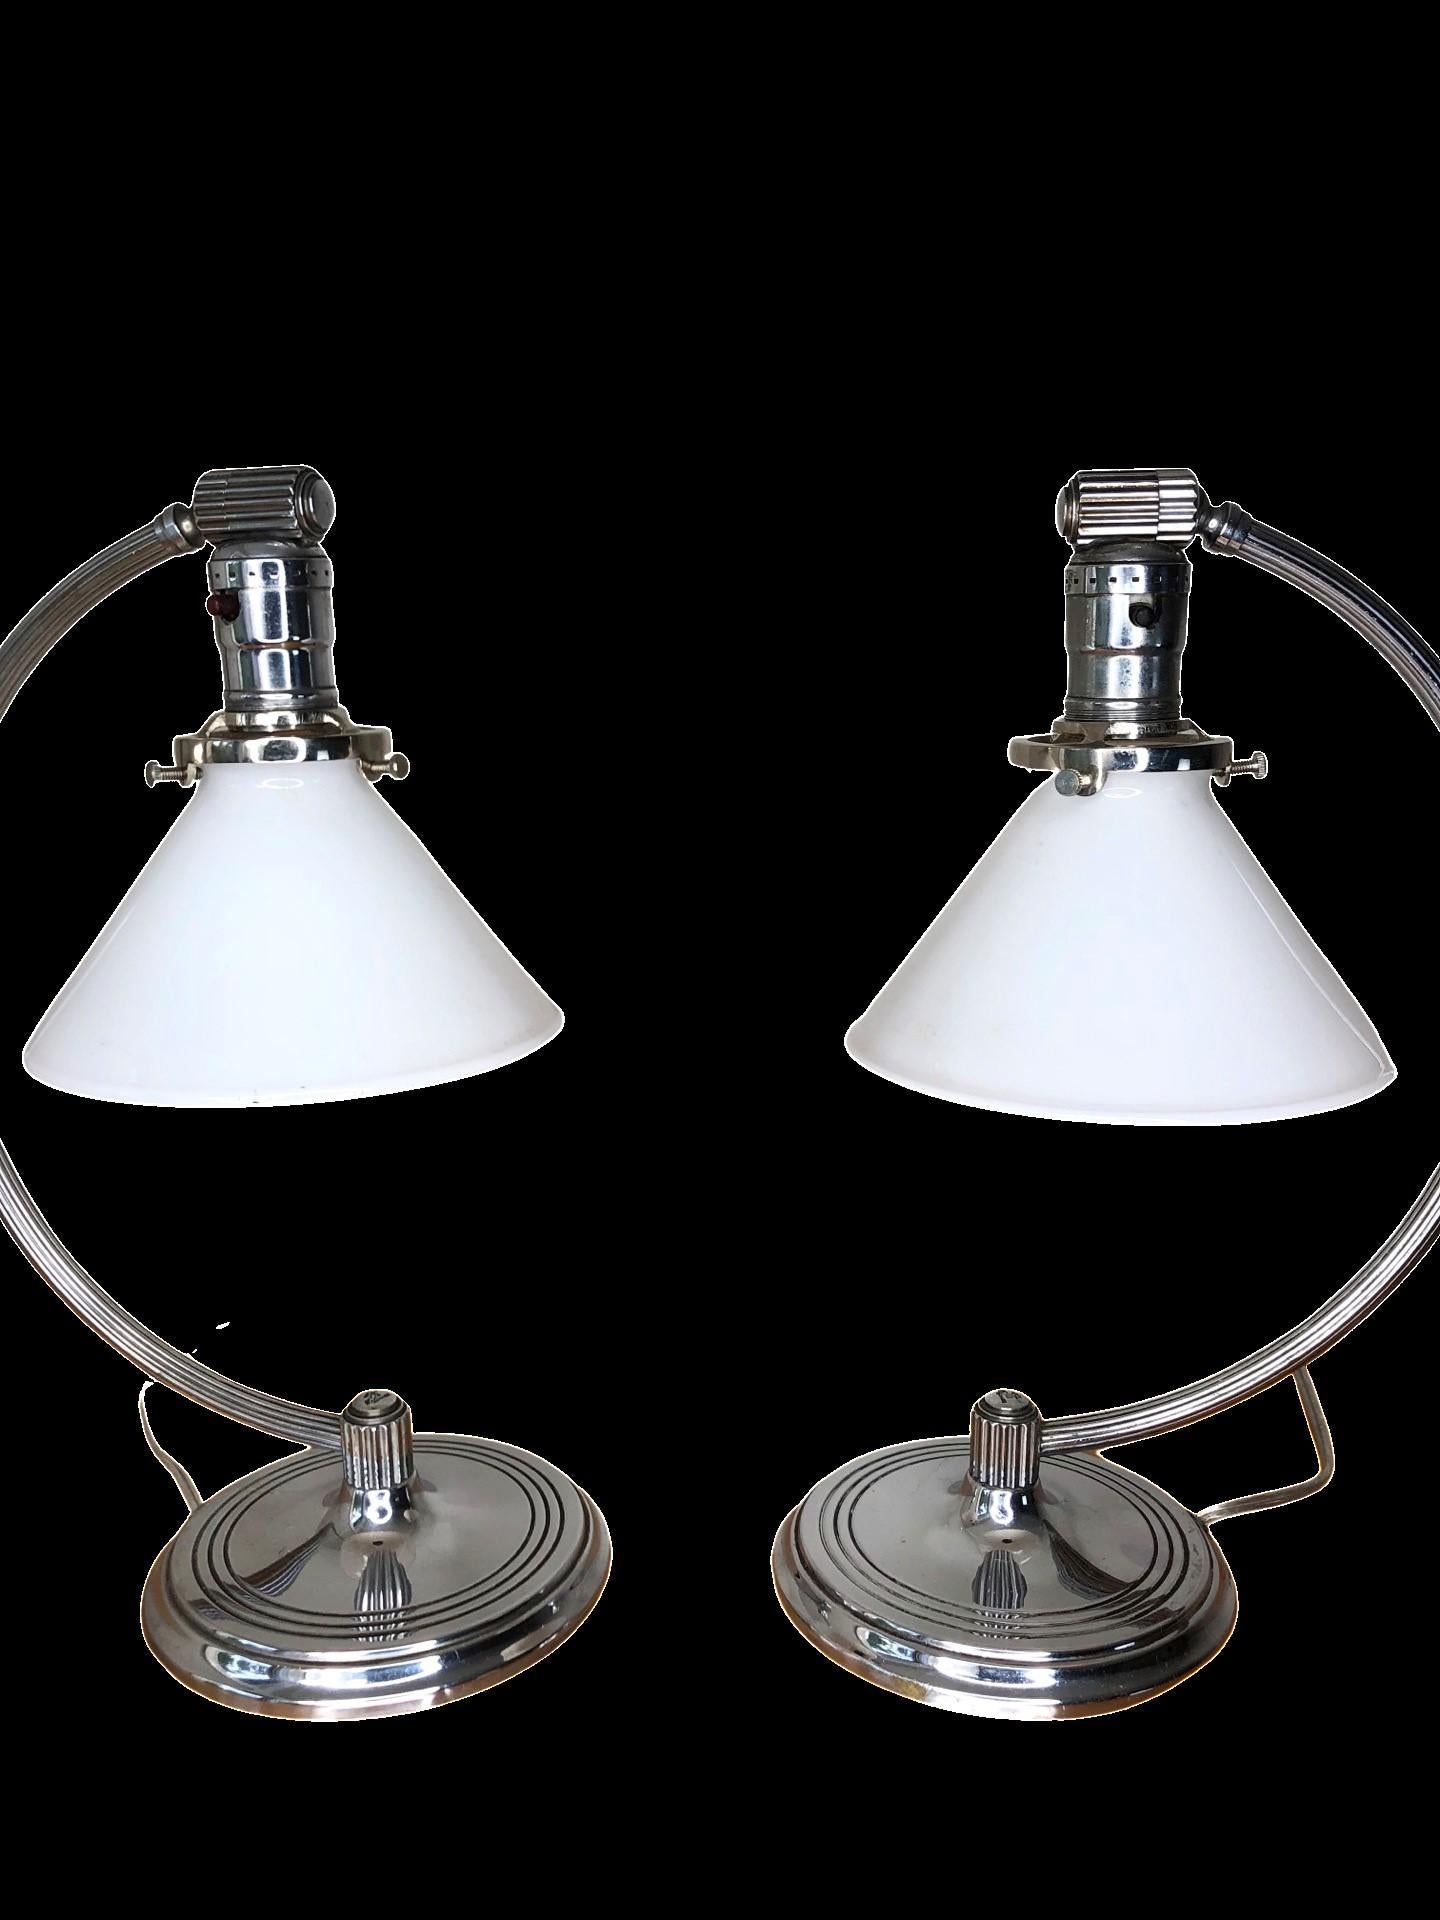 20th Century Pair of Chase Chrome Art Deco Desk Lamps For Sale